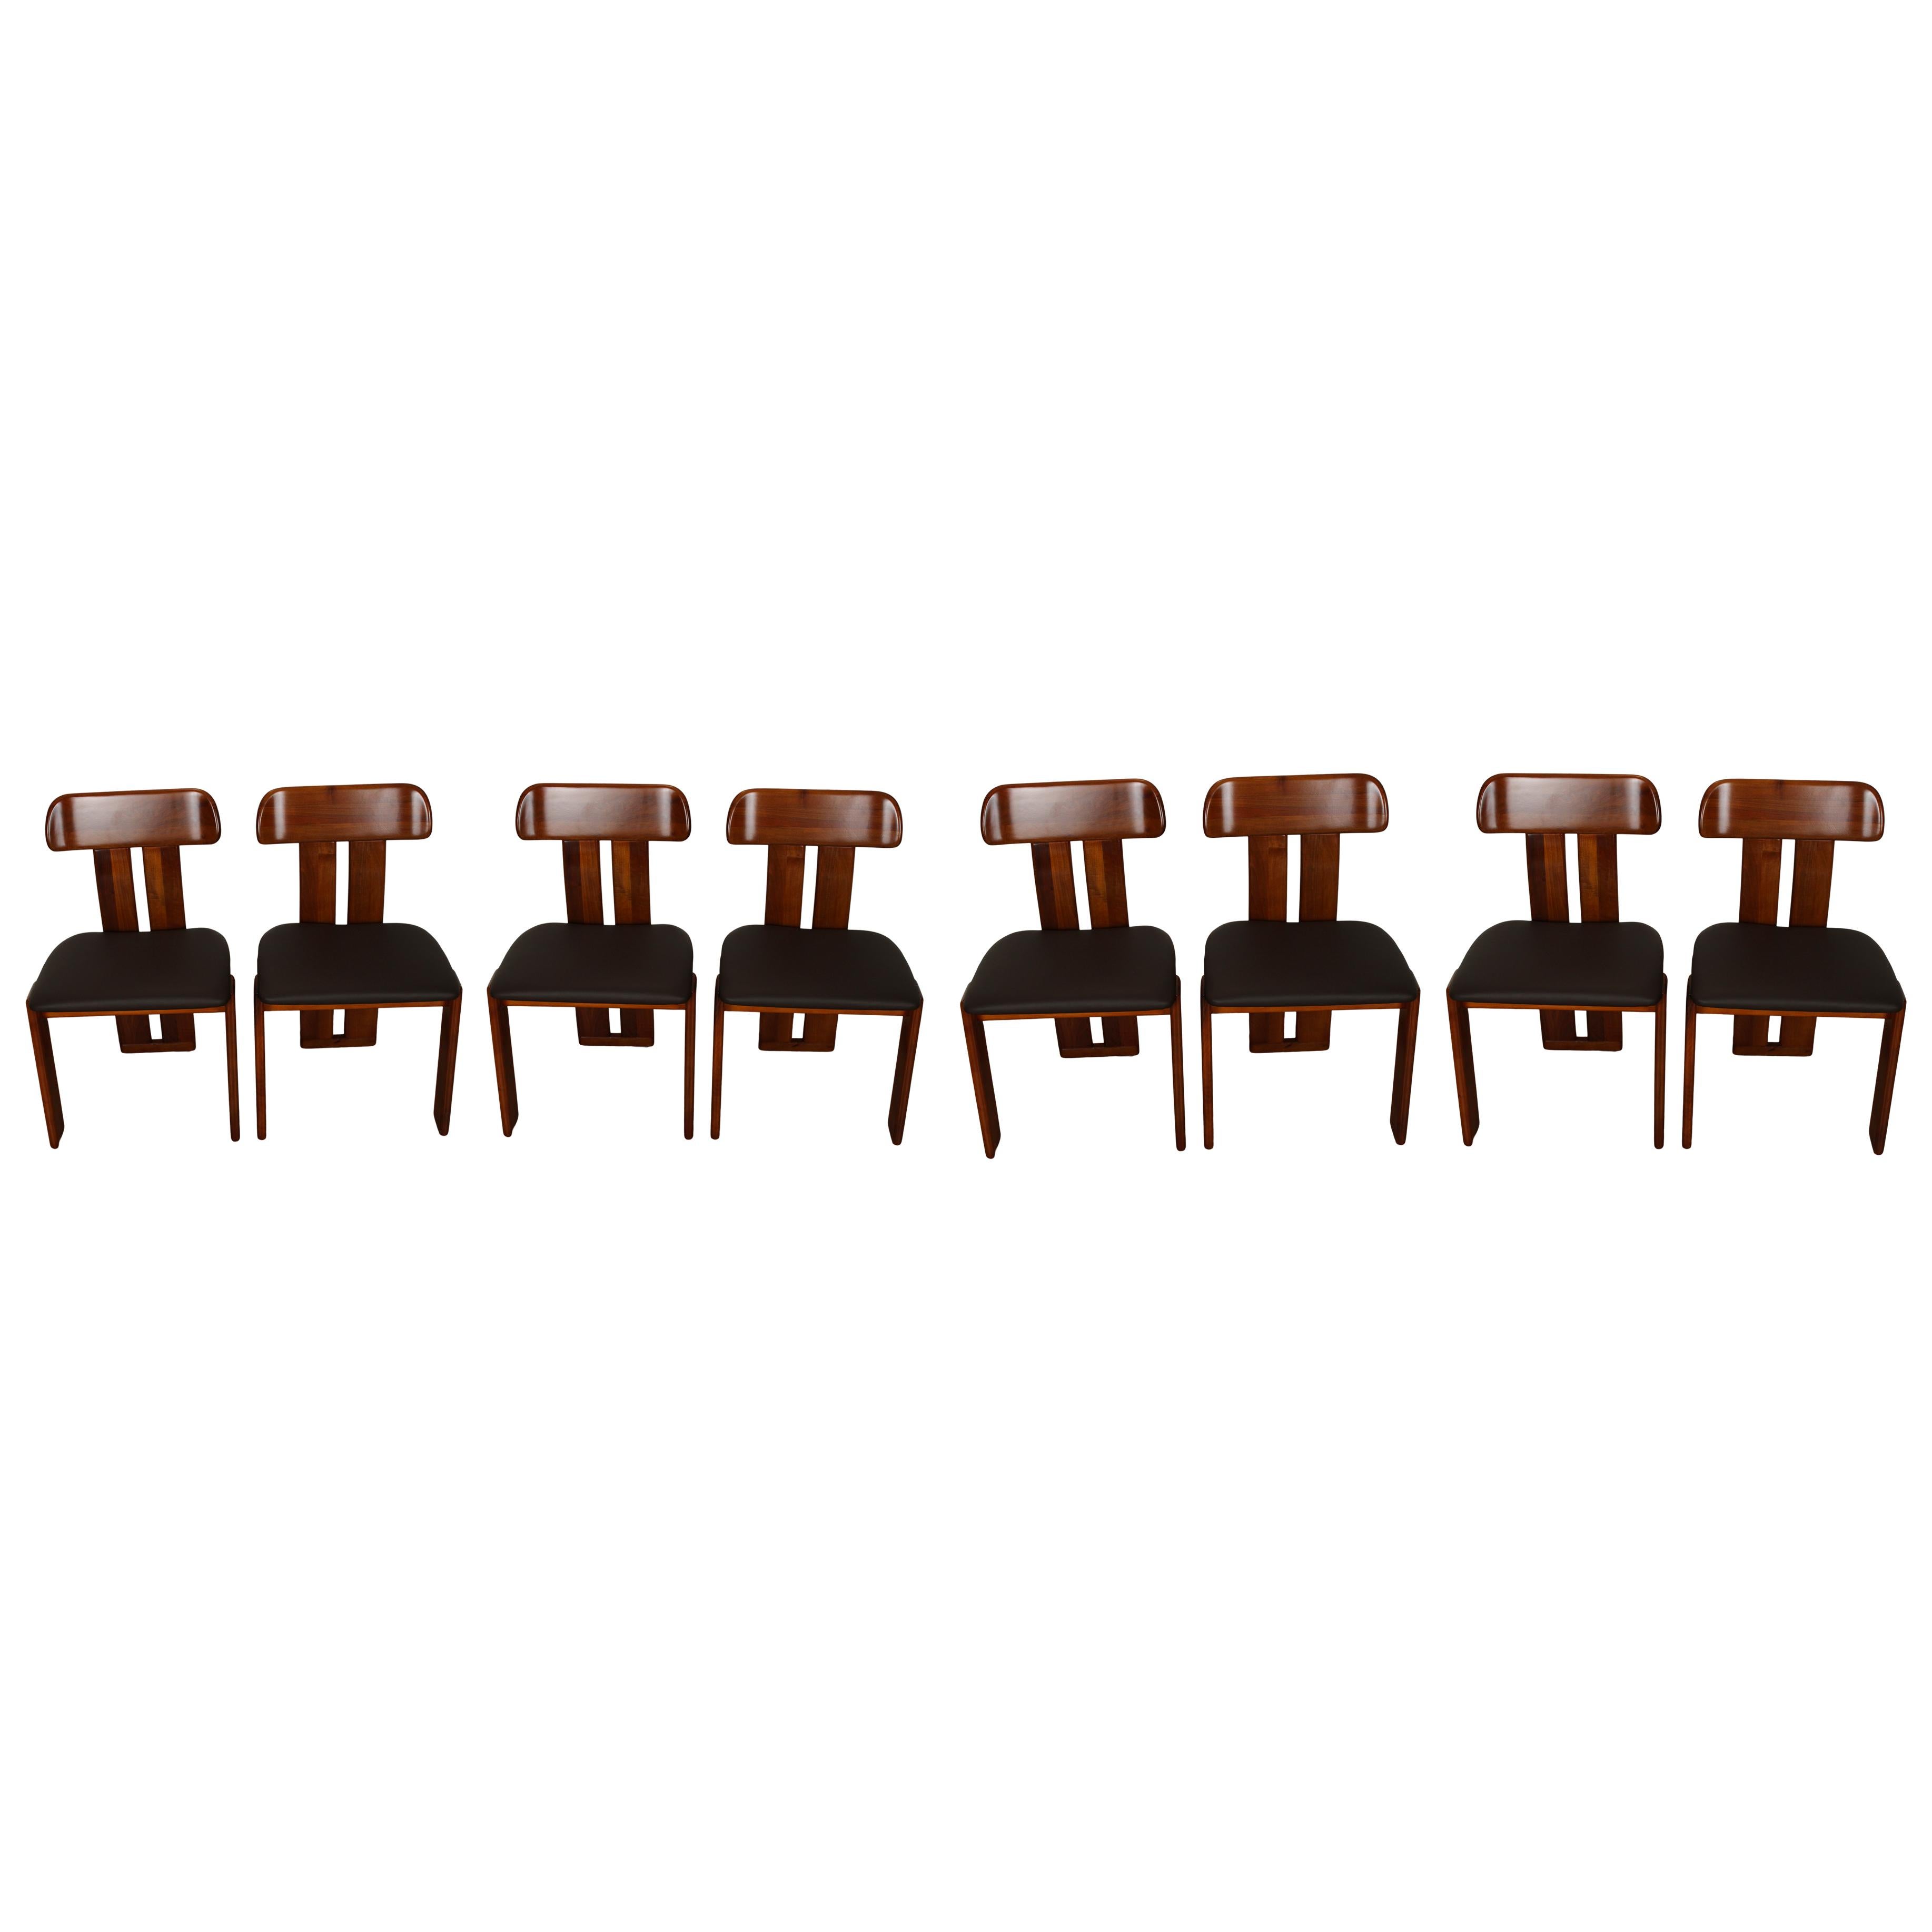 Mario Marenco Walnut Sapporo Dining Chairs for Mobilgirgi, 1970s, Set of 8 In Good Condition For Sale In Vicenza, IT